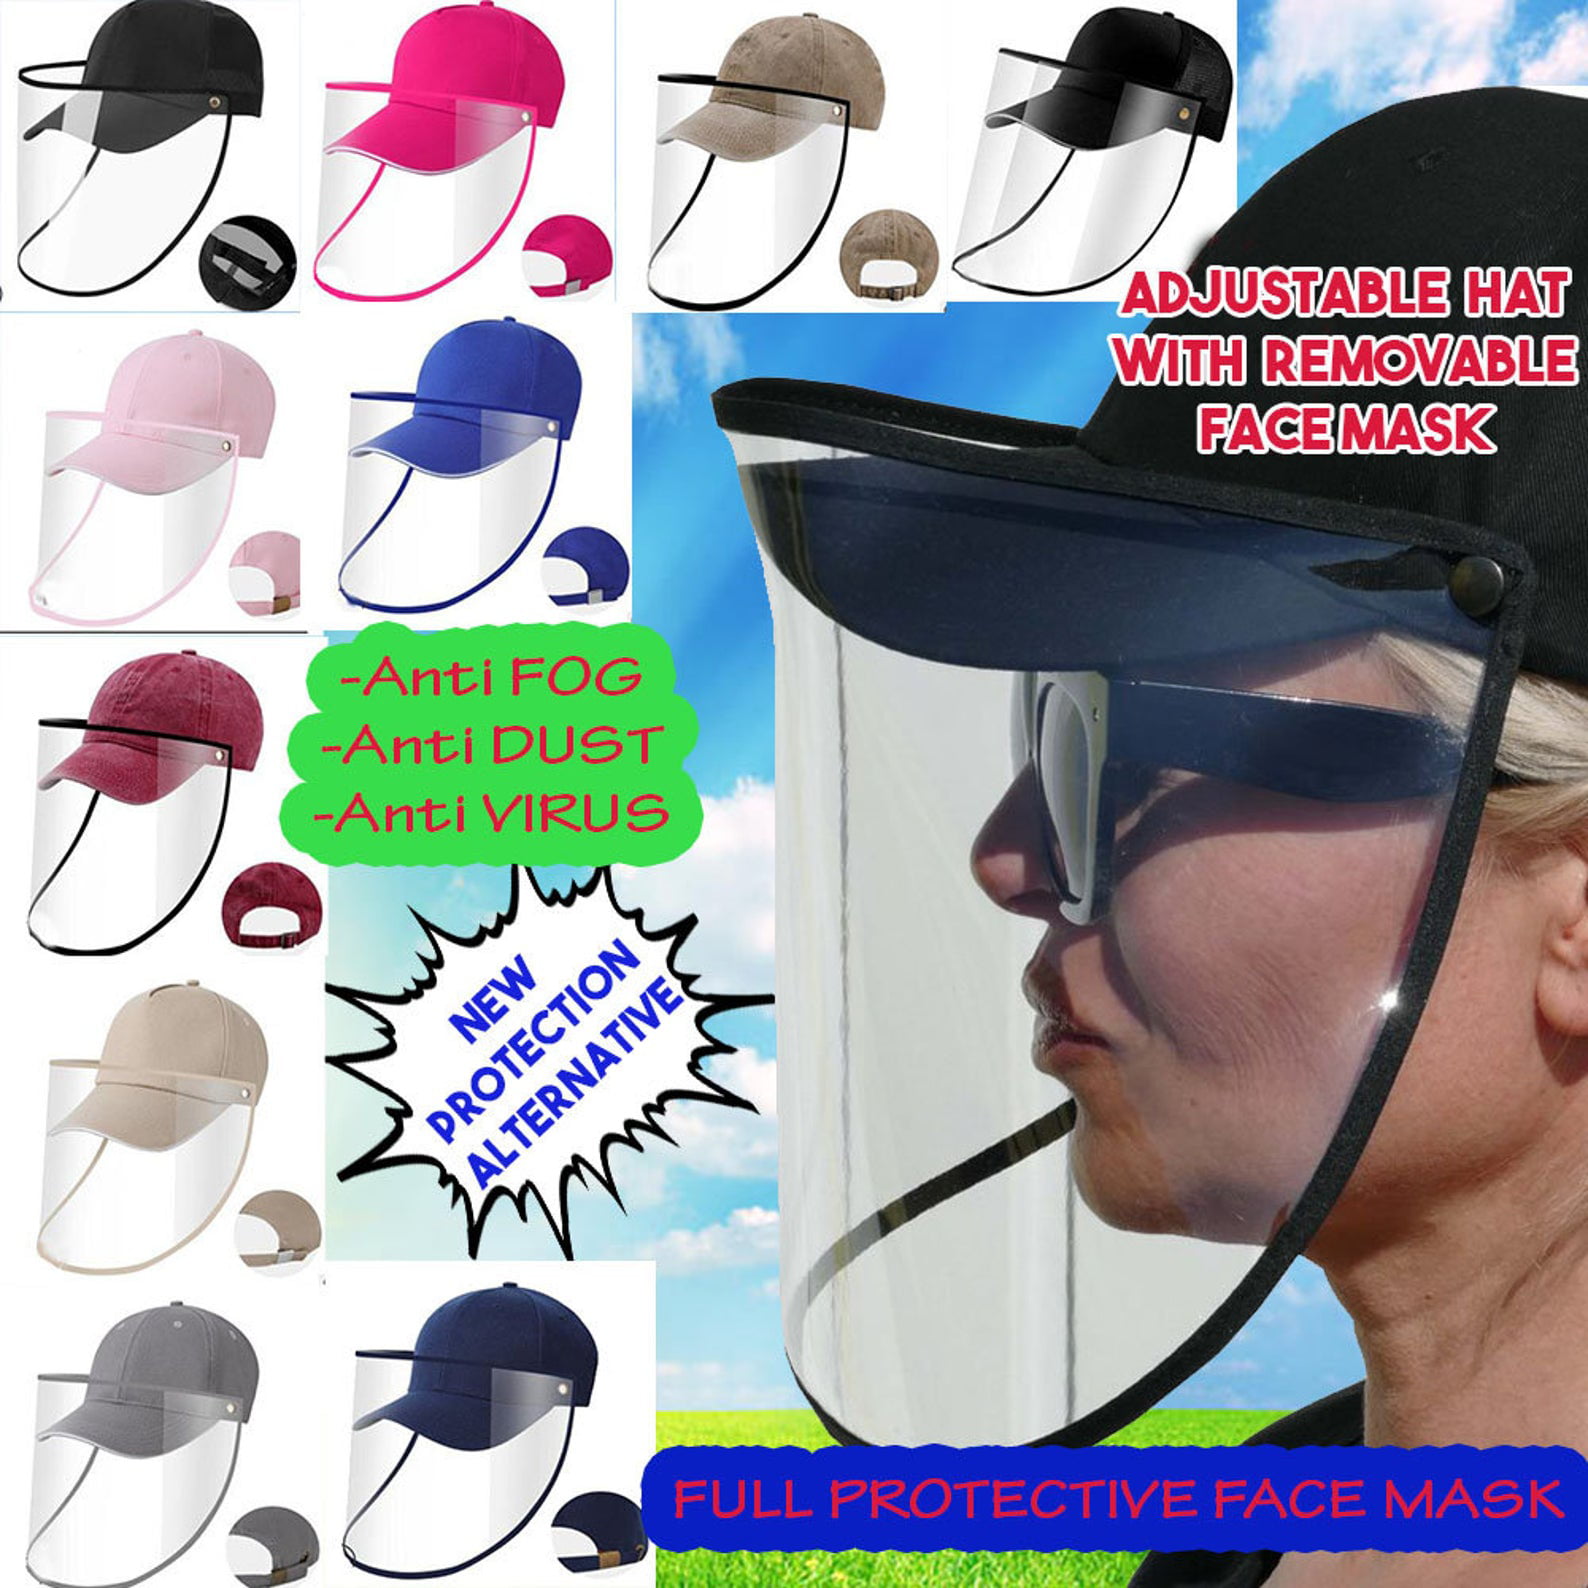 Female Anti-Droplet Saliva Empty Top Hat Anti-Virus Mask with Flip-up Visor Anti-Spitting Splash Cap Protective Face Shield for Outdoor Activities Working Hiking UV Protection Sun Hat 